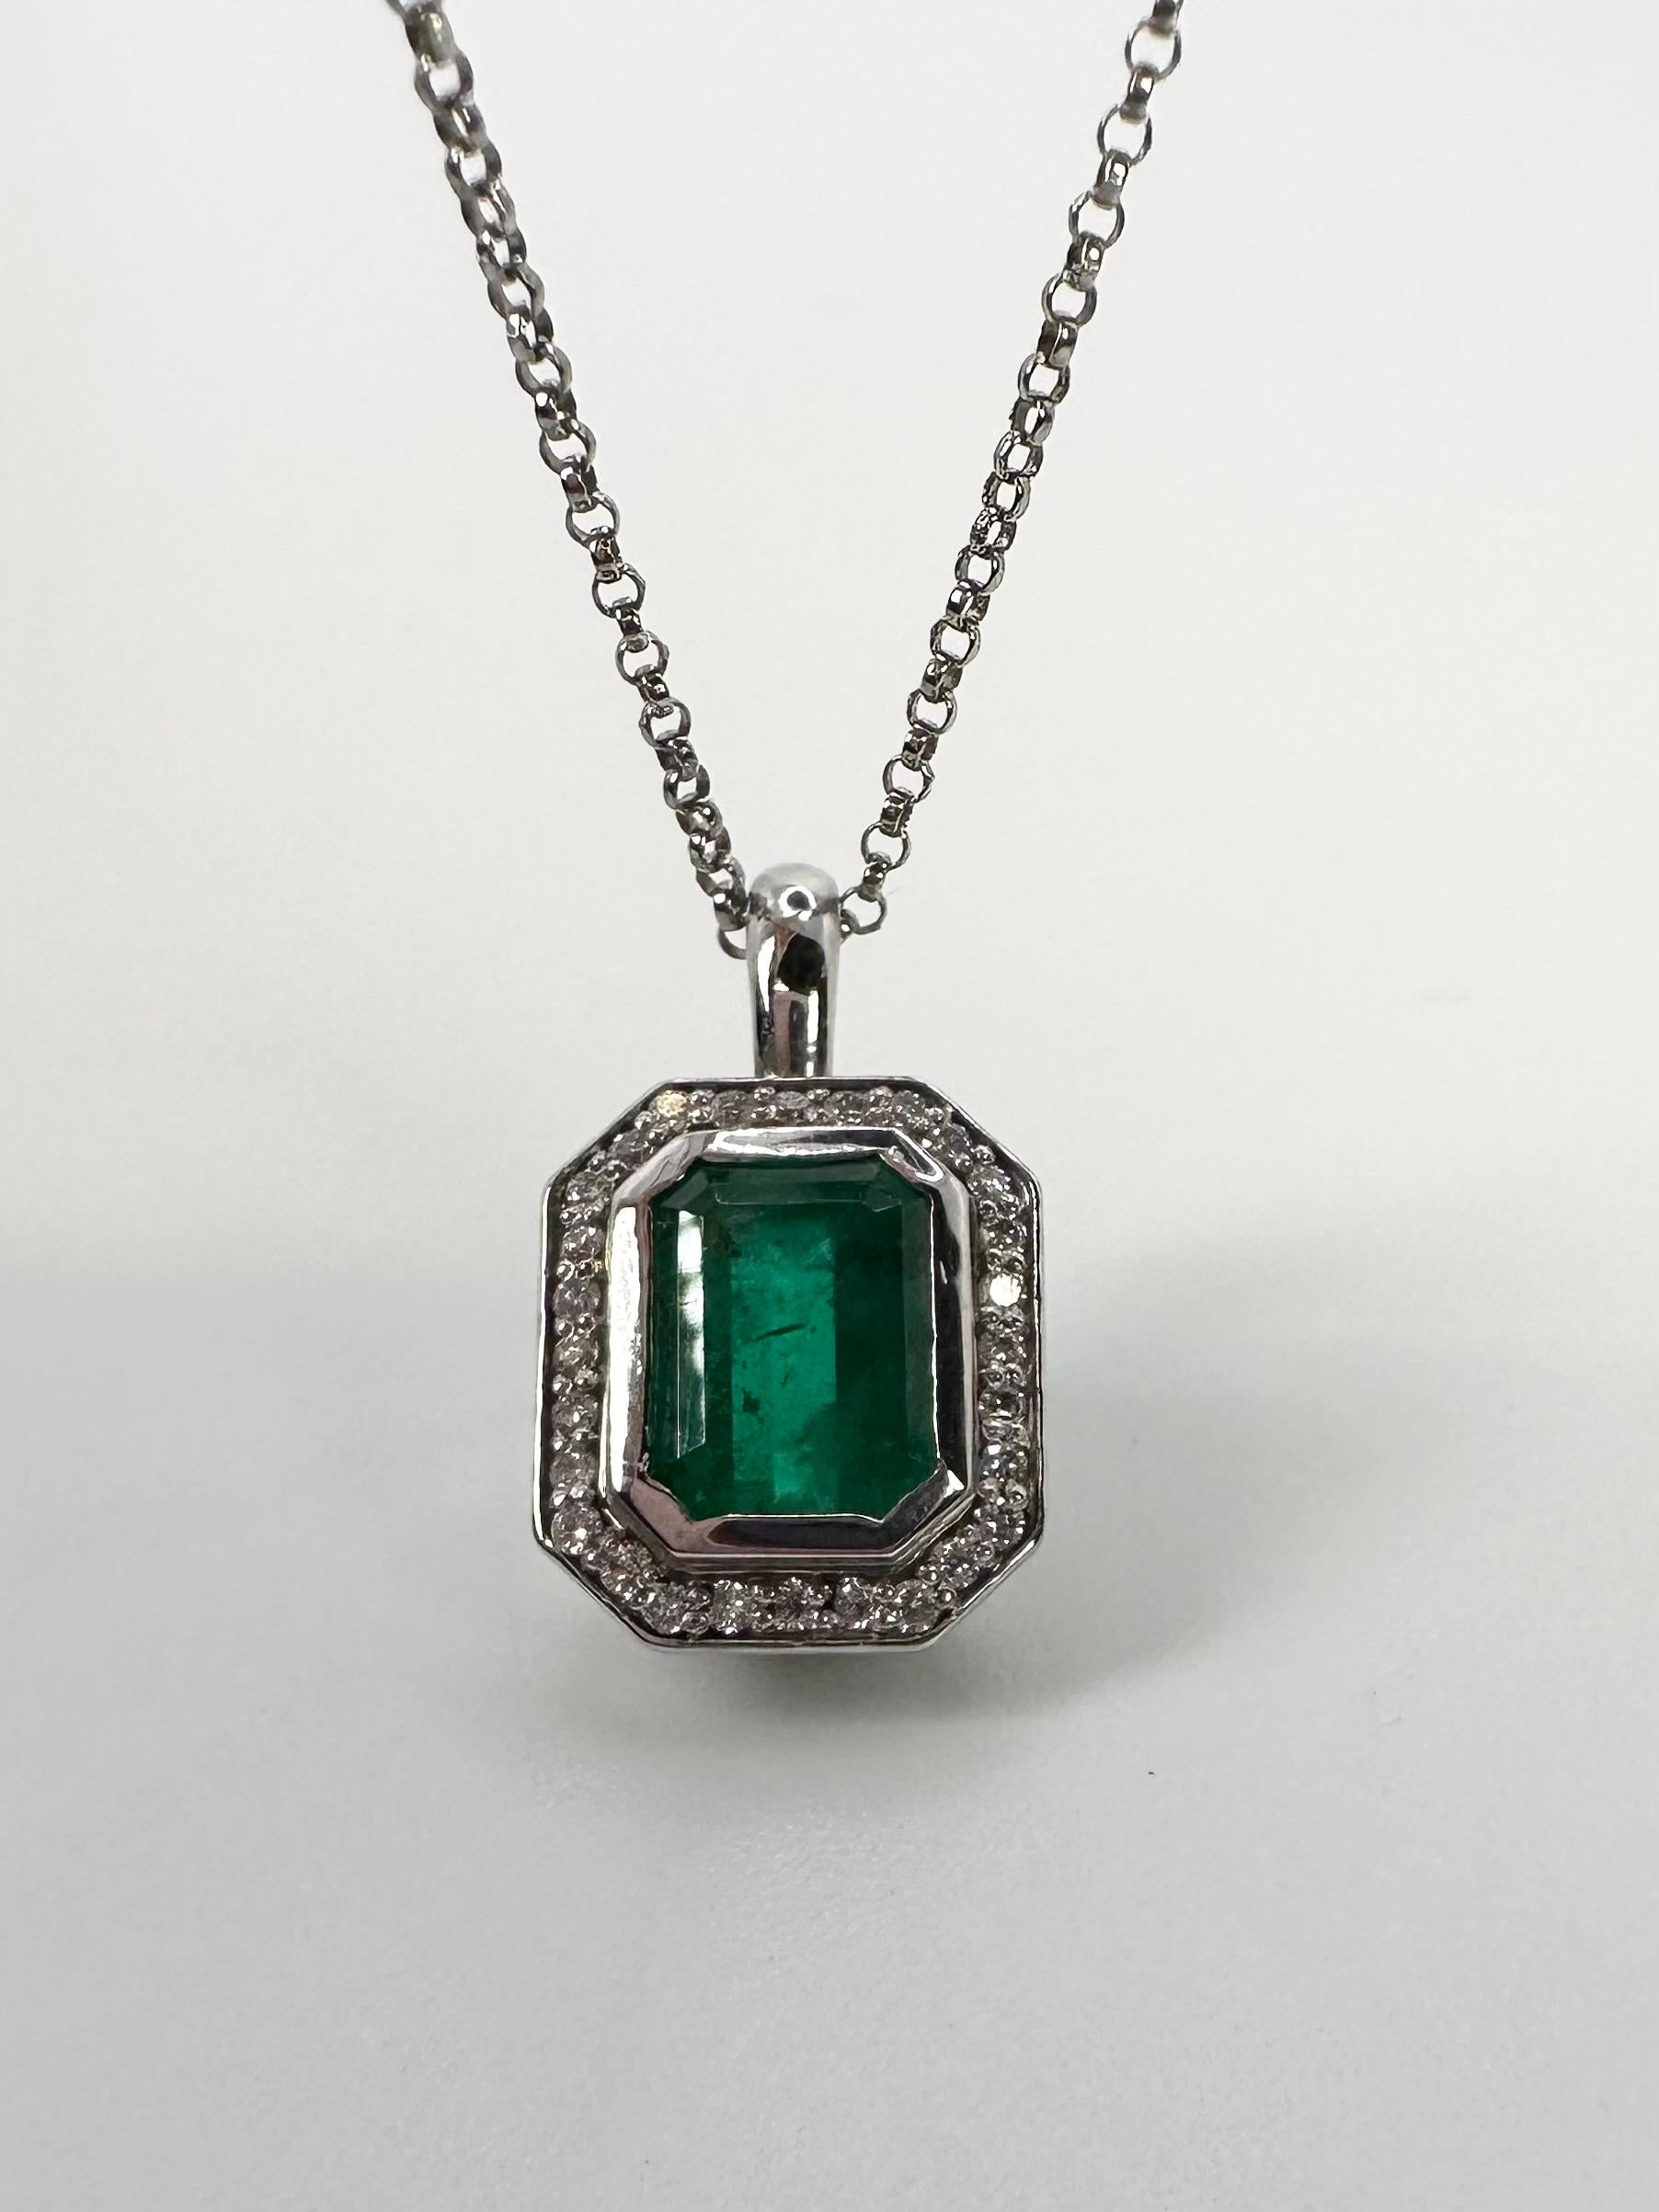 Elegant emerald and diamond pendant necklace in 14KT white gold.

GRAM WEIGHT: 4.76gr
GOLD: 14KT gold
NATURAL EMERALD(S)
Clarity/Color: Moderately Included/Green
Carat:1.95ct
NATURAL DIAMOND
Color/Clarity: H/SI
Carat:0.17ct
Item#: 230-00020 

WHAT